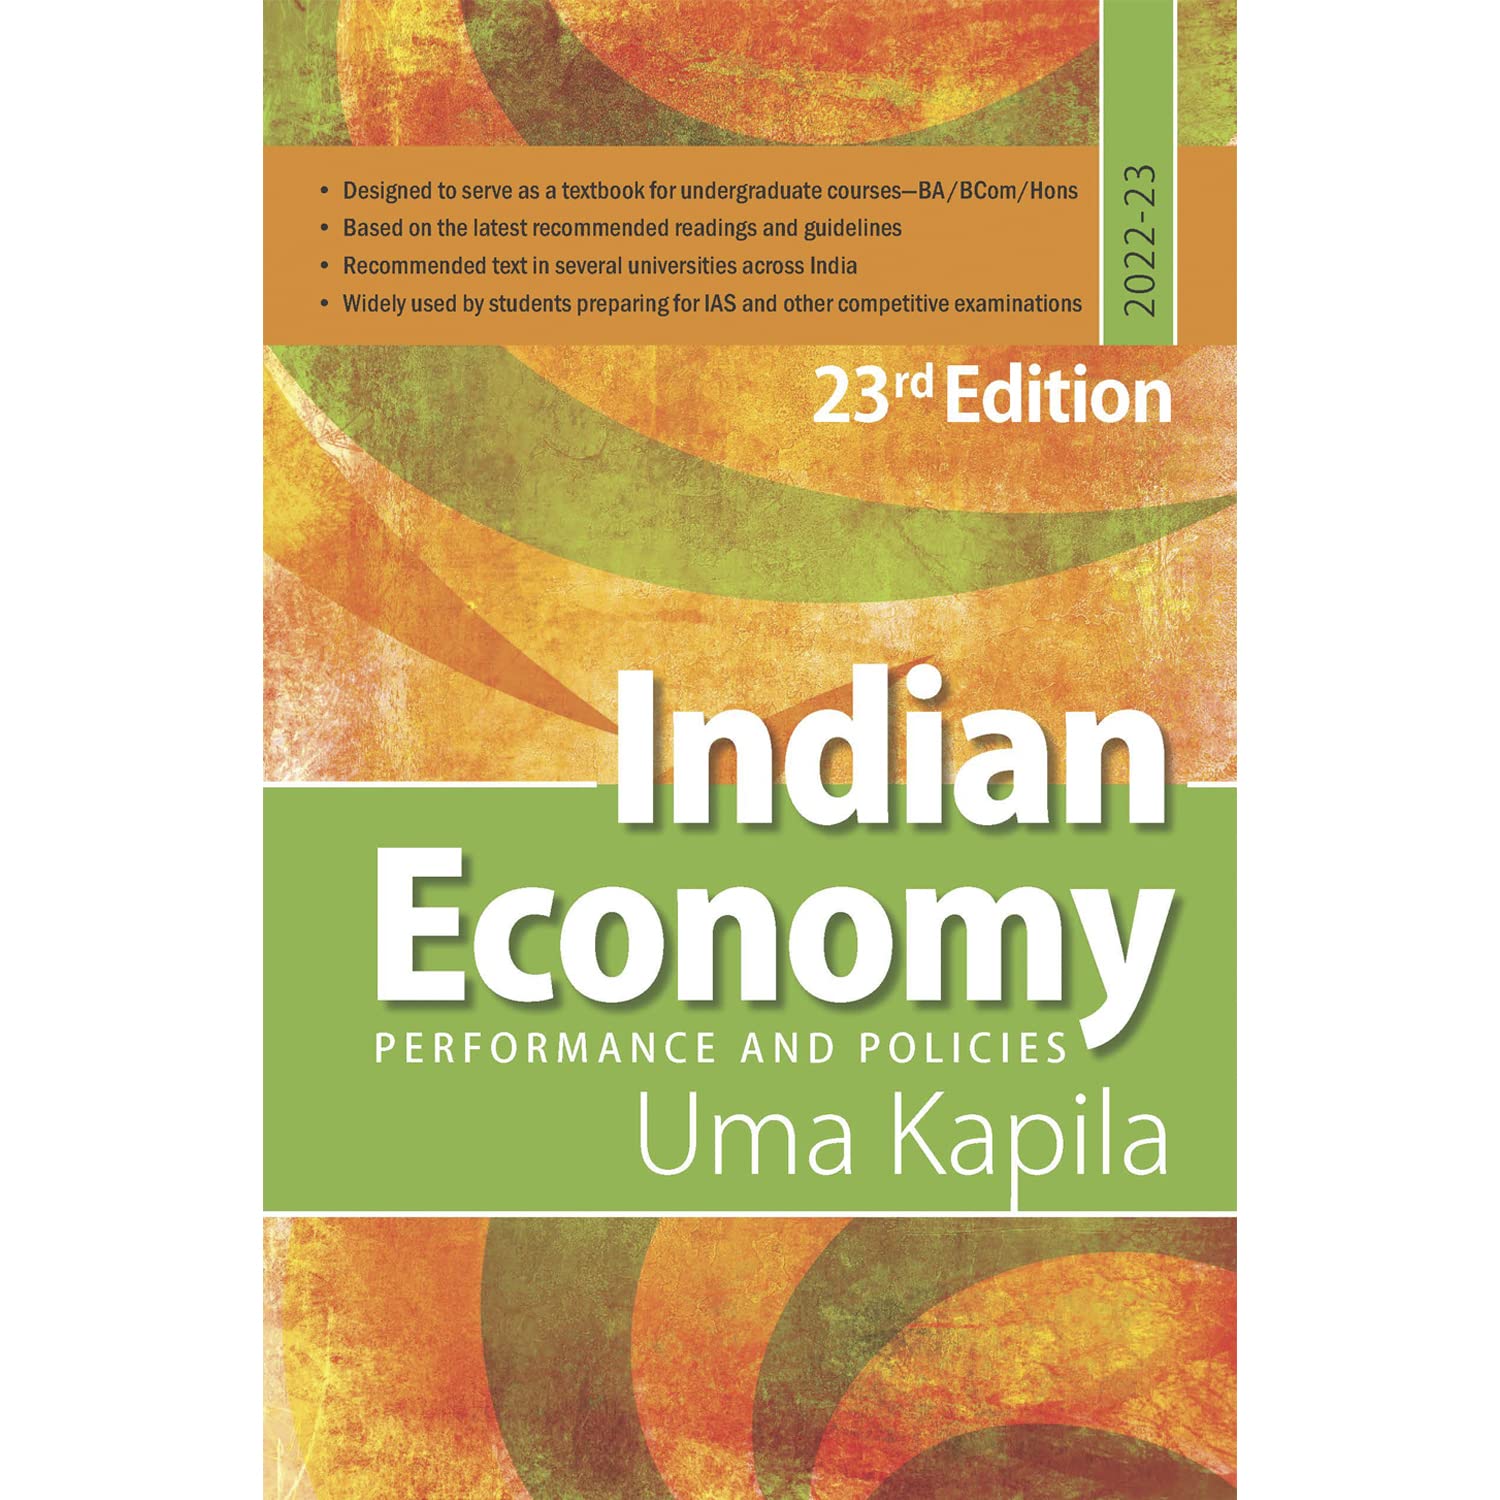 Indian Economy:PERFORMANCE AND POLICIES (23rd Edition) 2022-23